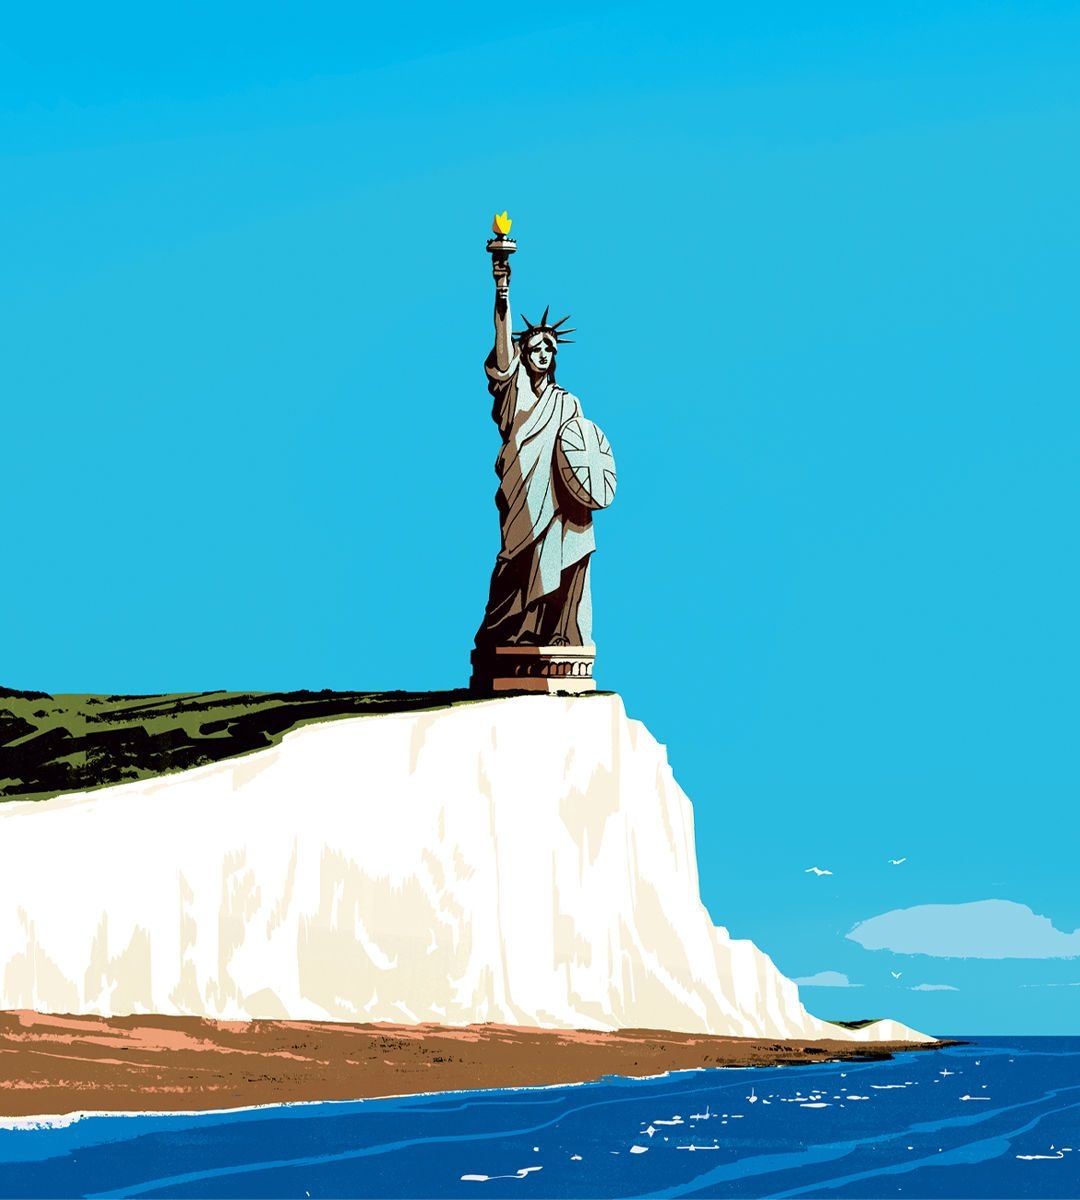 The Statue of Liberty on the White Cliffs of Dover